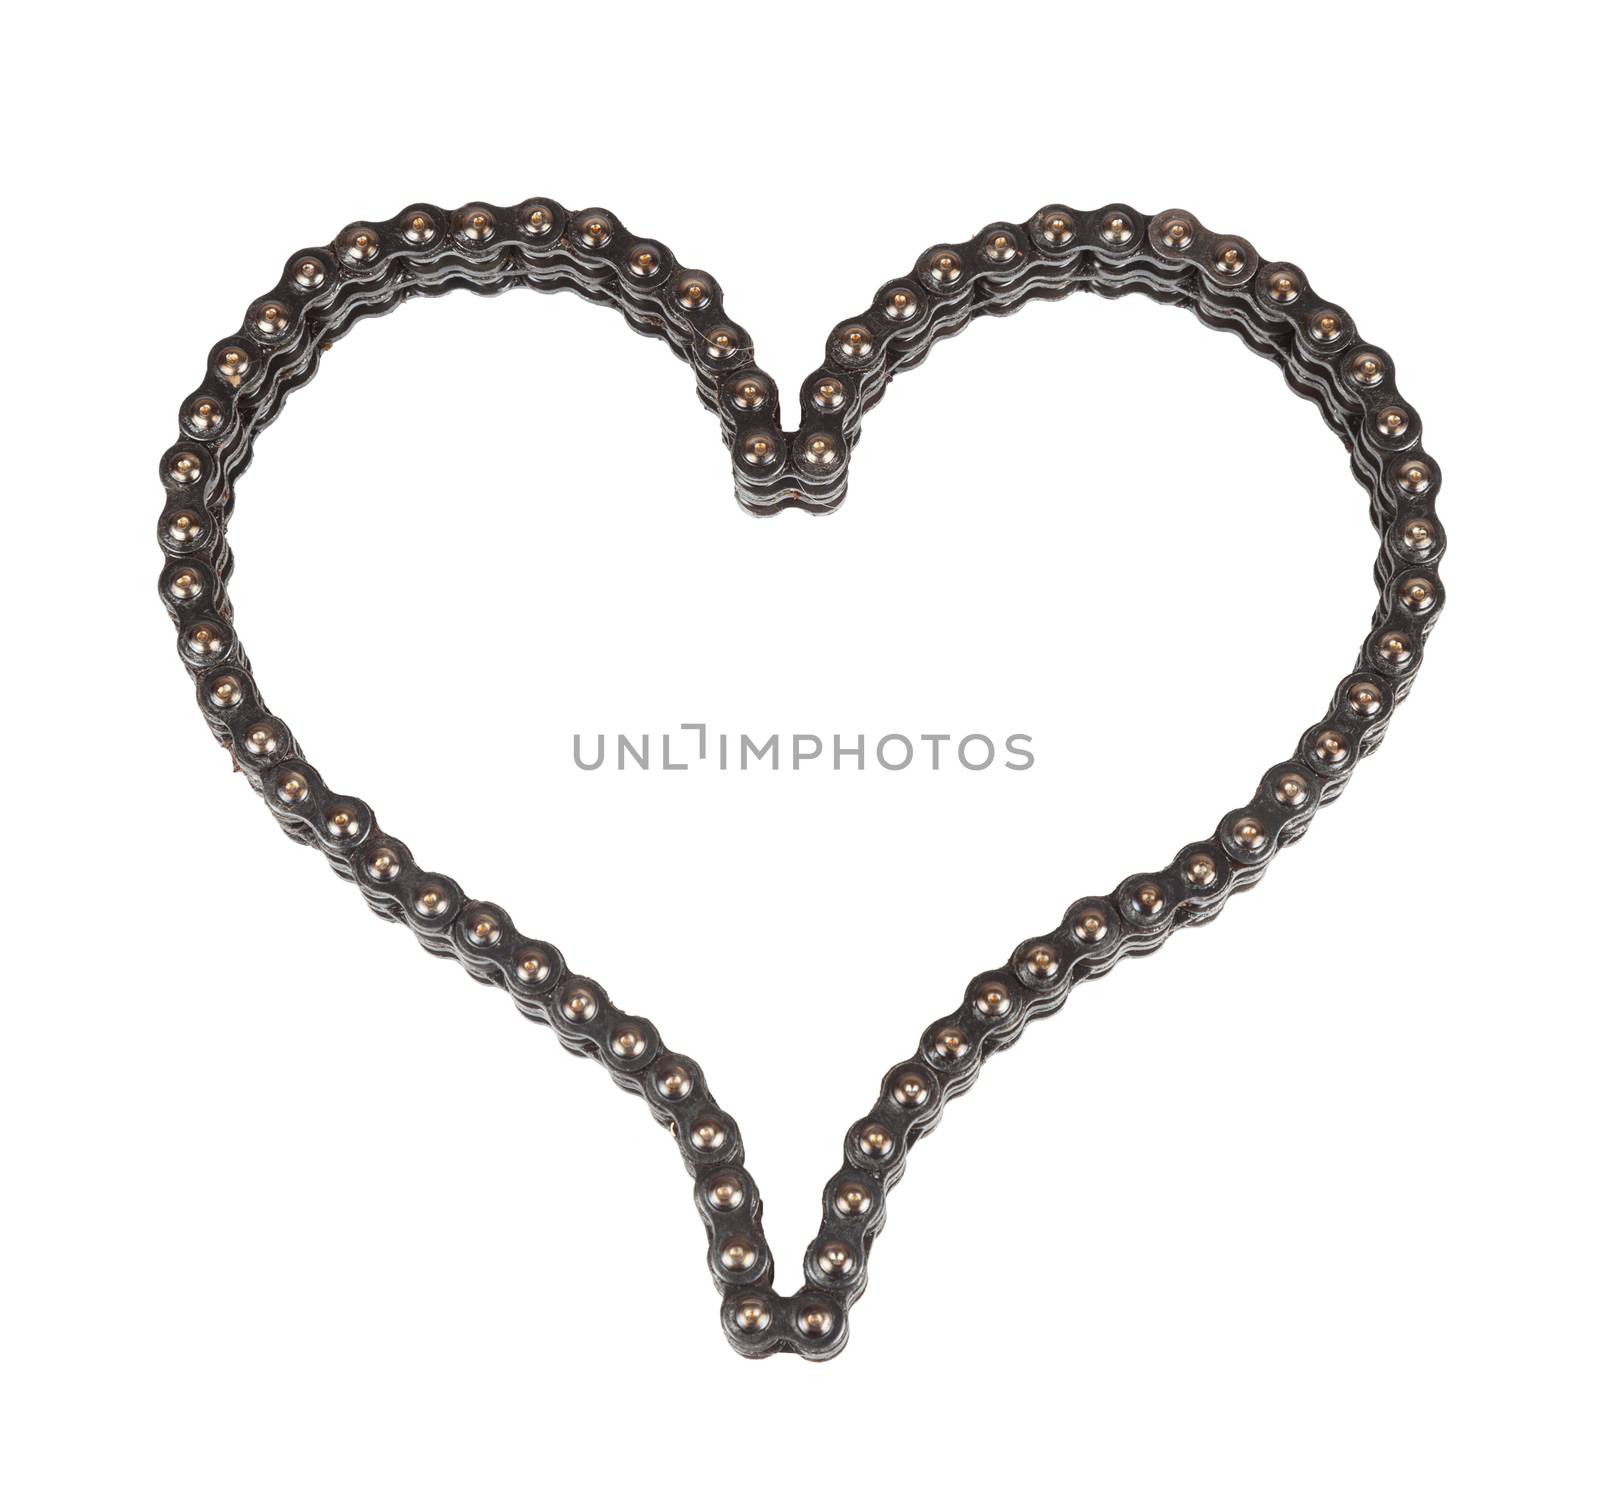 Roller chain with for motorcycle in the form of heart by AleksandrN